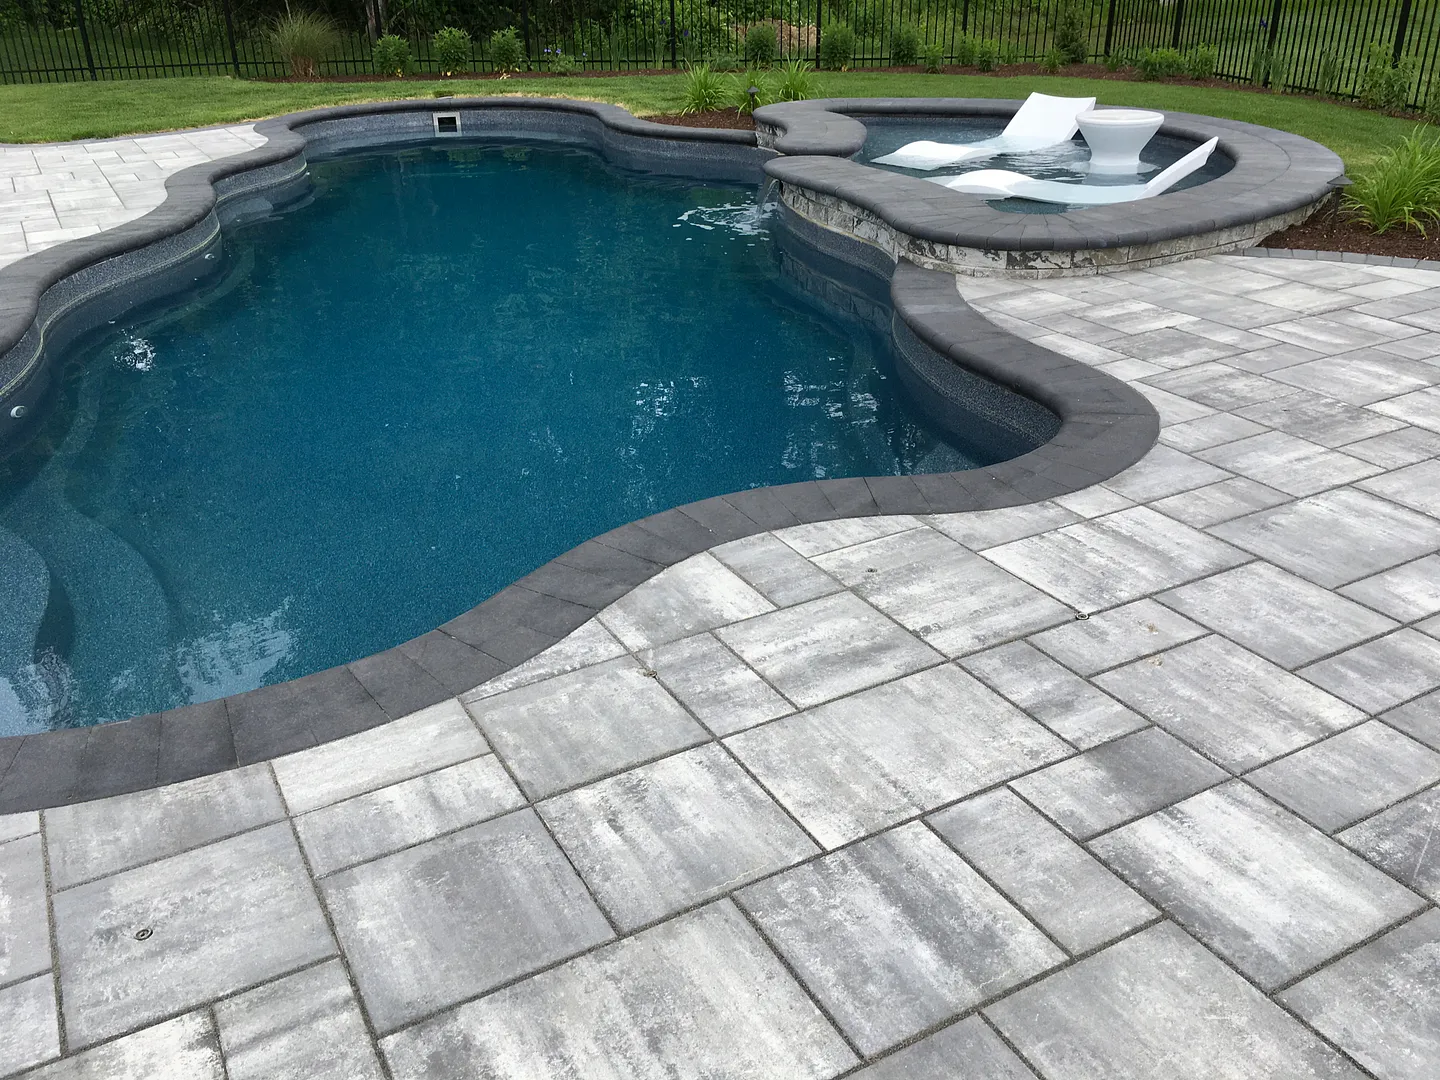 Avalon Design Group Offers Professional Swimming Pool Construction Services in West Greenwich, RI